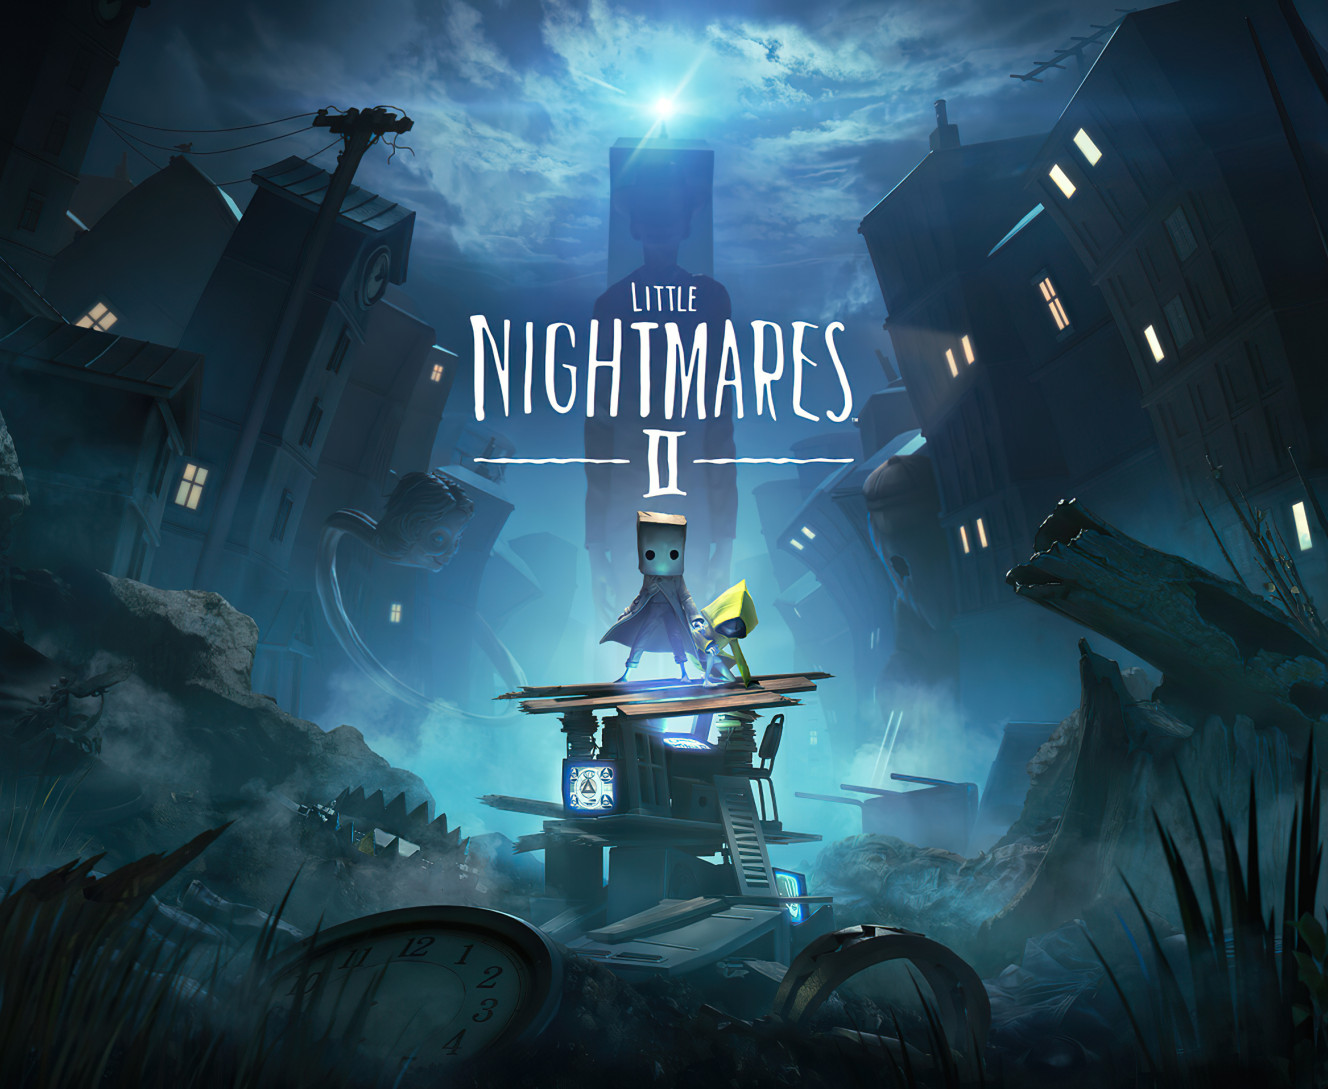 Little Nightmares - Mouse Pad - Little Nightmares 2 - Mfest